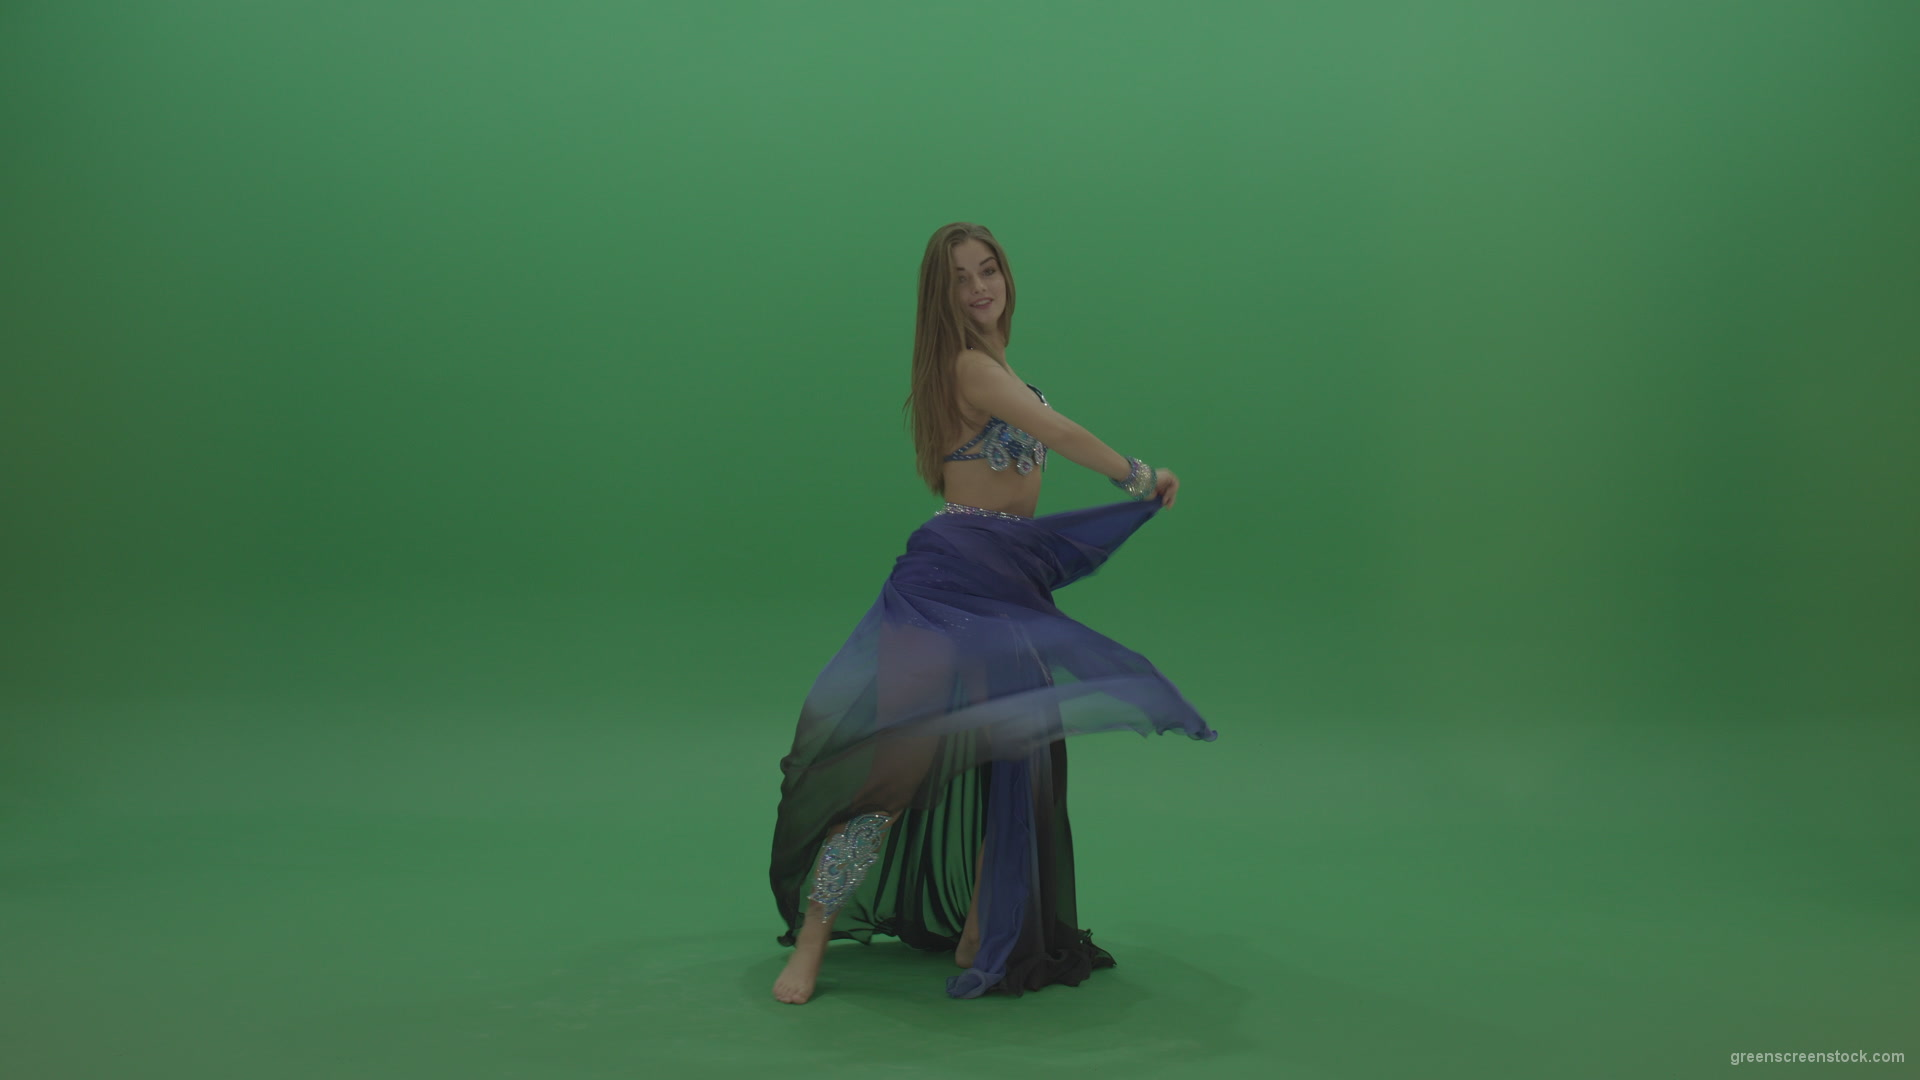 Splendid-belly-dancer-in-purple-and-black-wear-display-amazing-dance-moves-over-chromakey-background_006 Green Screen Stock